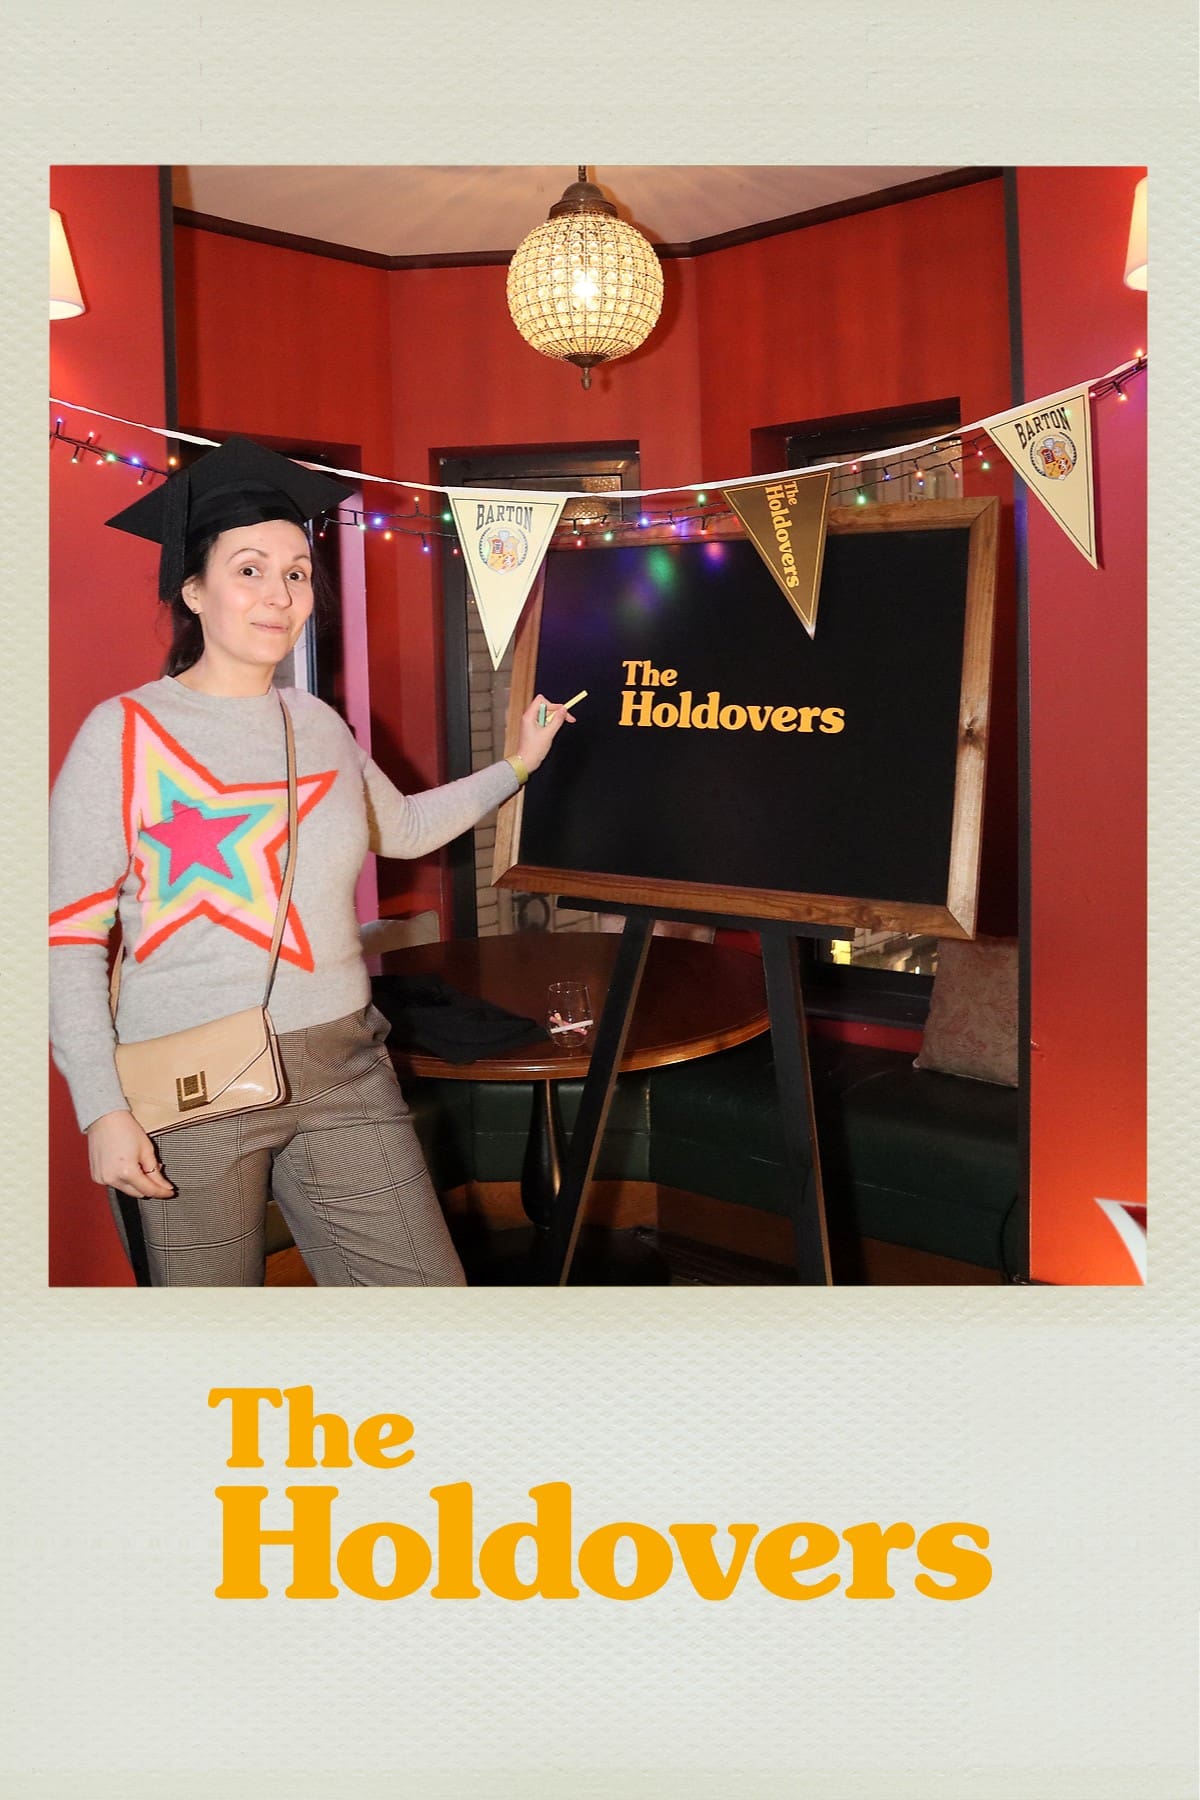 The Holdovers, Piccadilly Circus, Central London